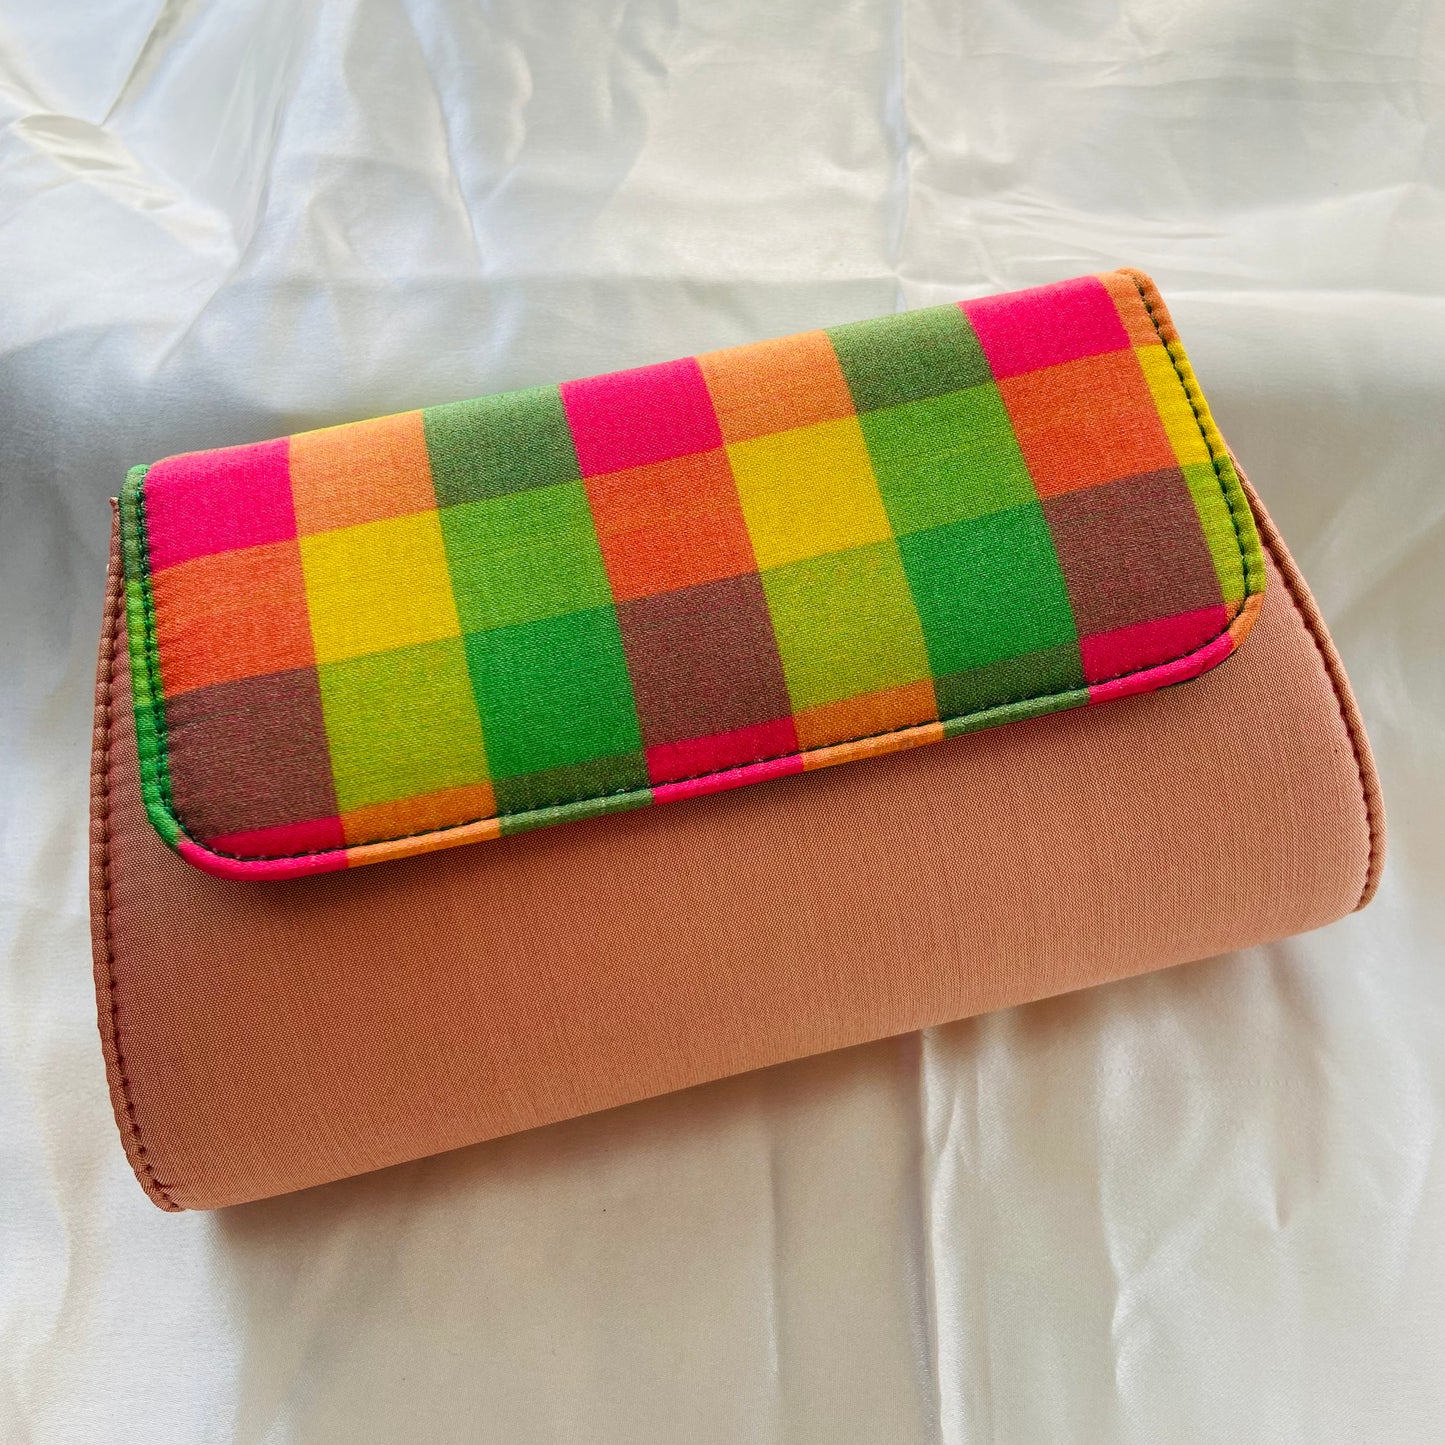 Small Clutch Purse for Party and Occasions